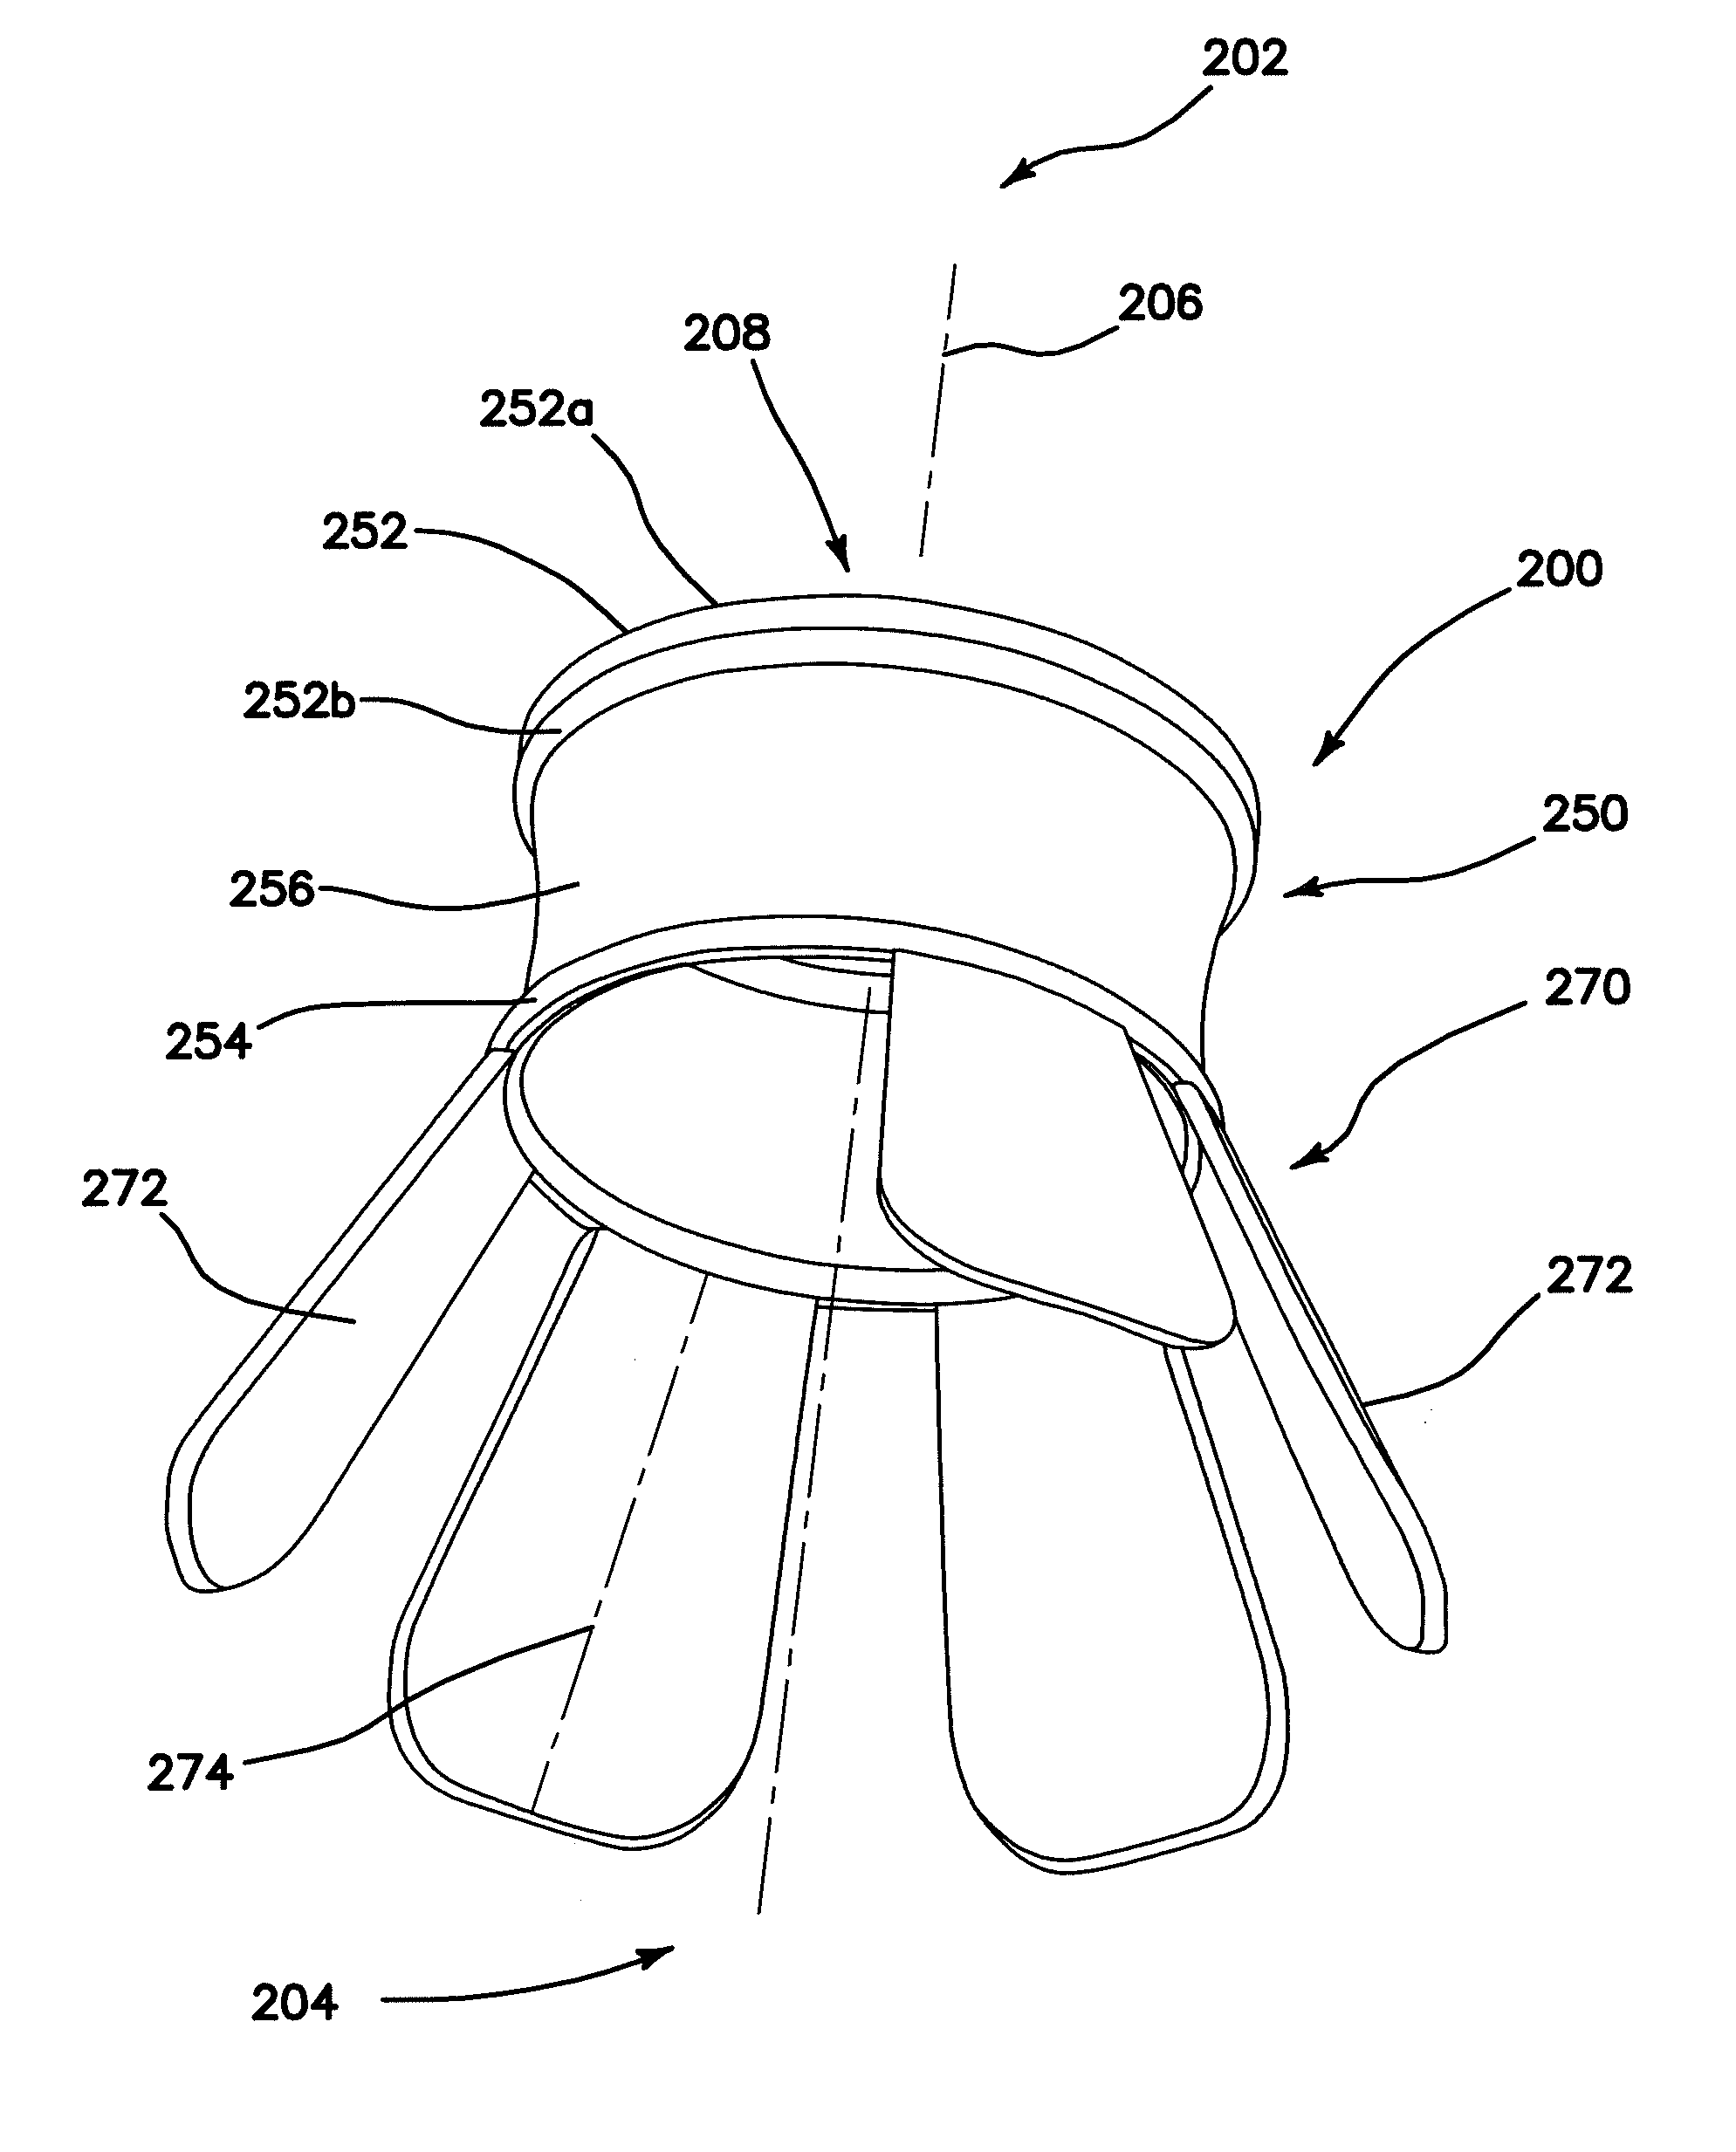 Surgical access device comprising internal retractor